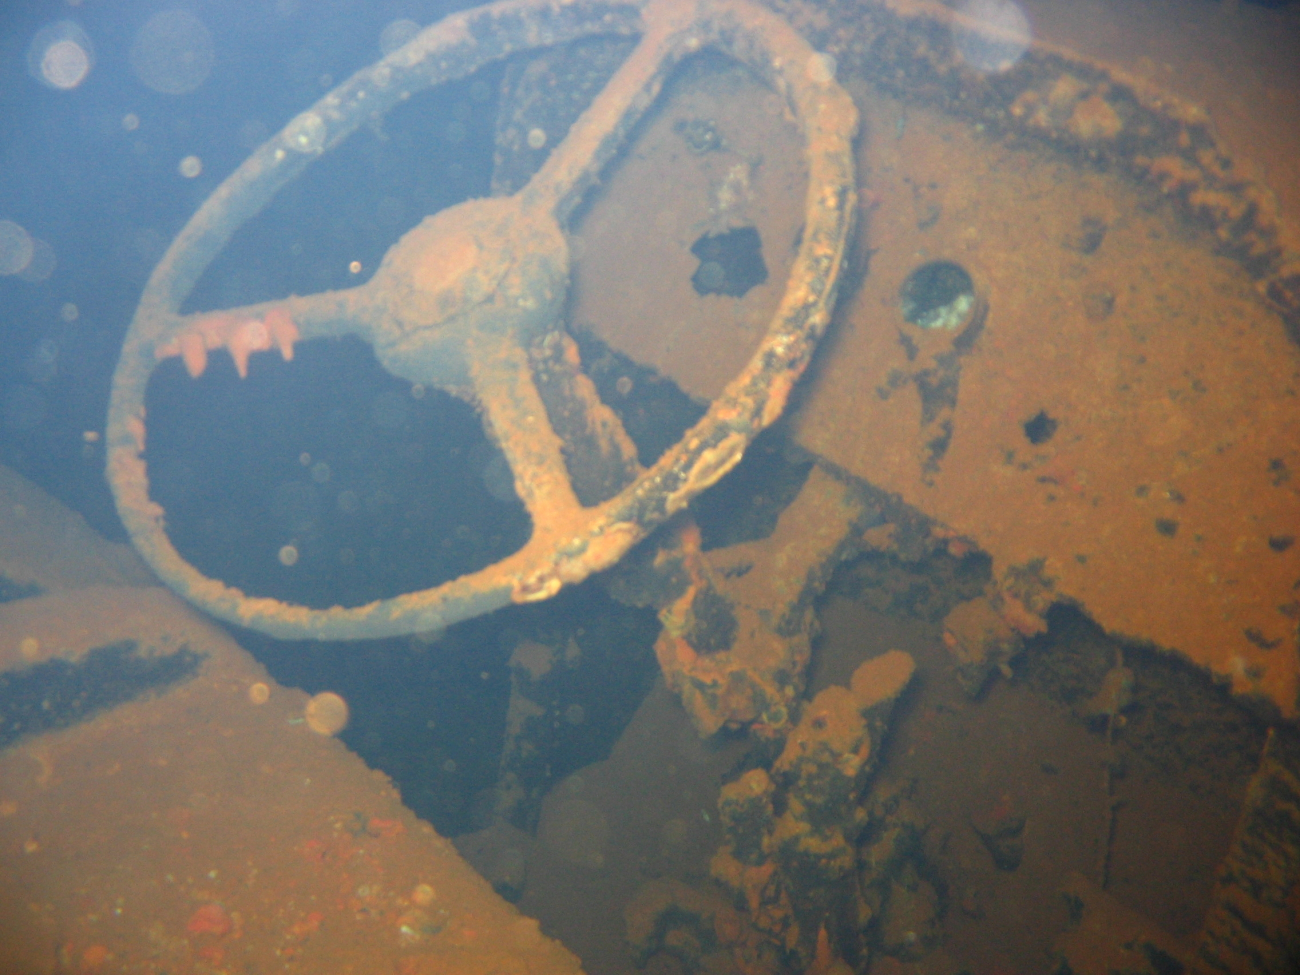 Cab and steering wheel of a truck on the Hoku Maru